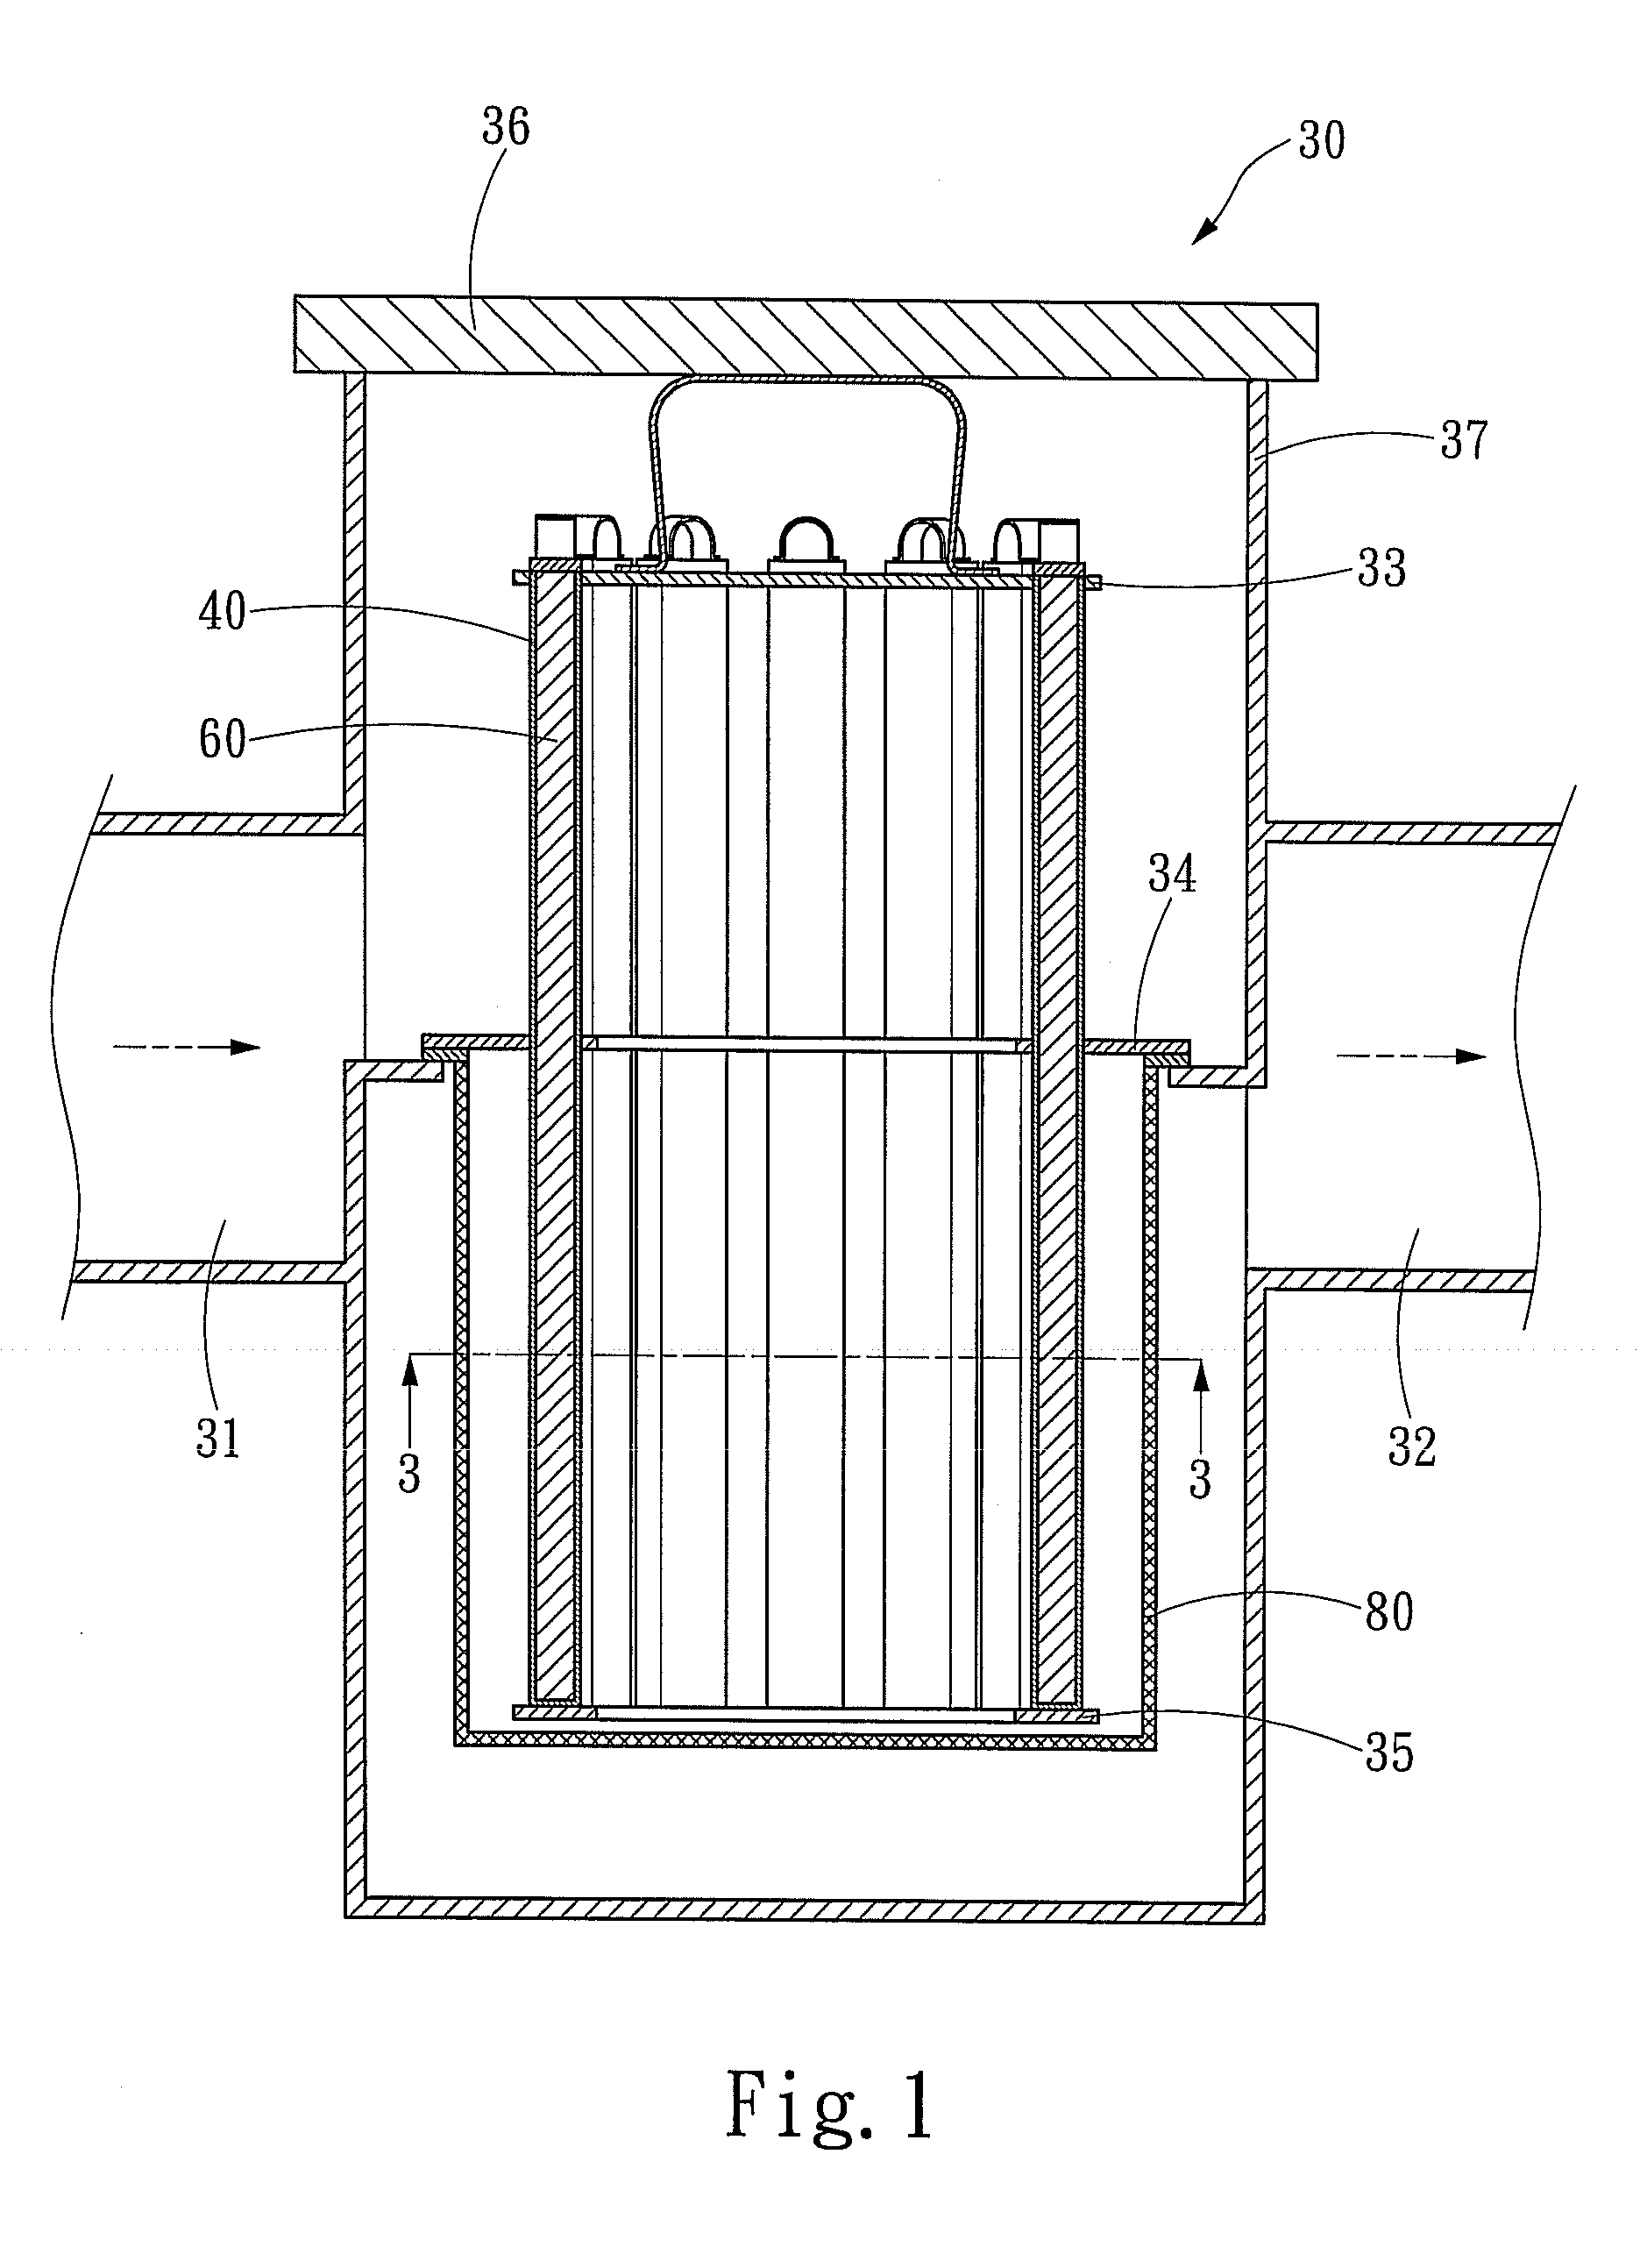 Process and apparatus for online rejuvenation of contaminated sulfolane solvent